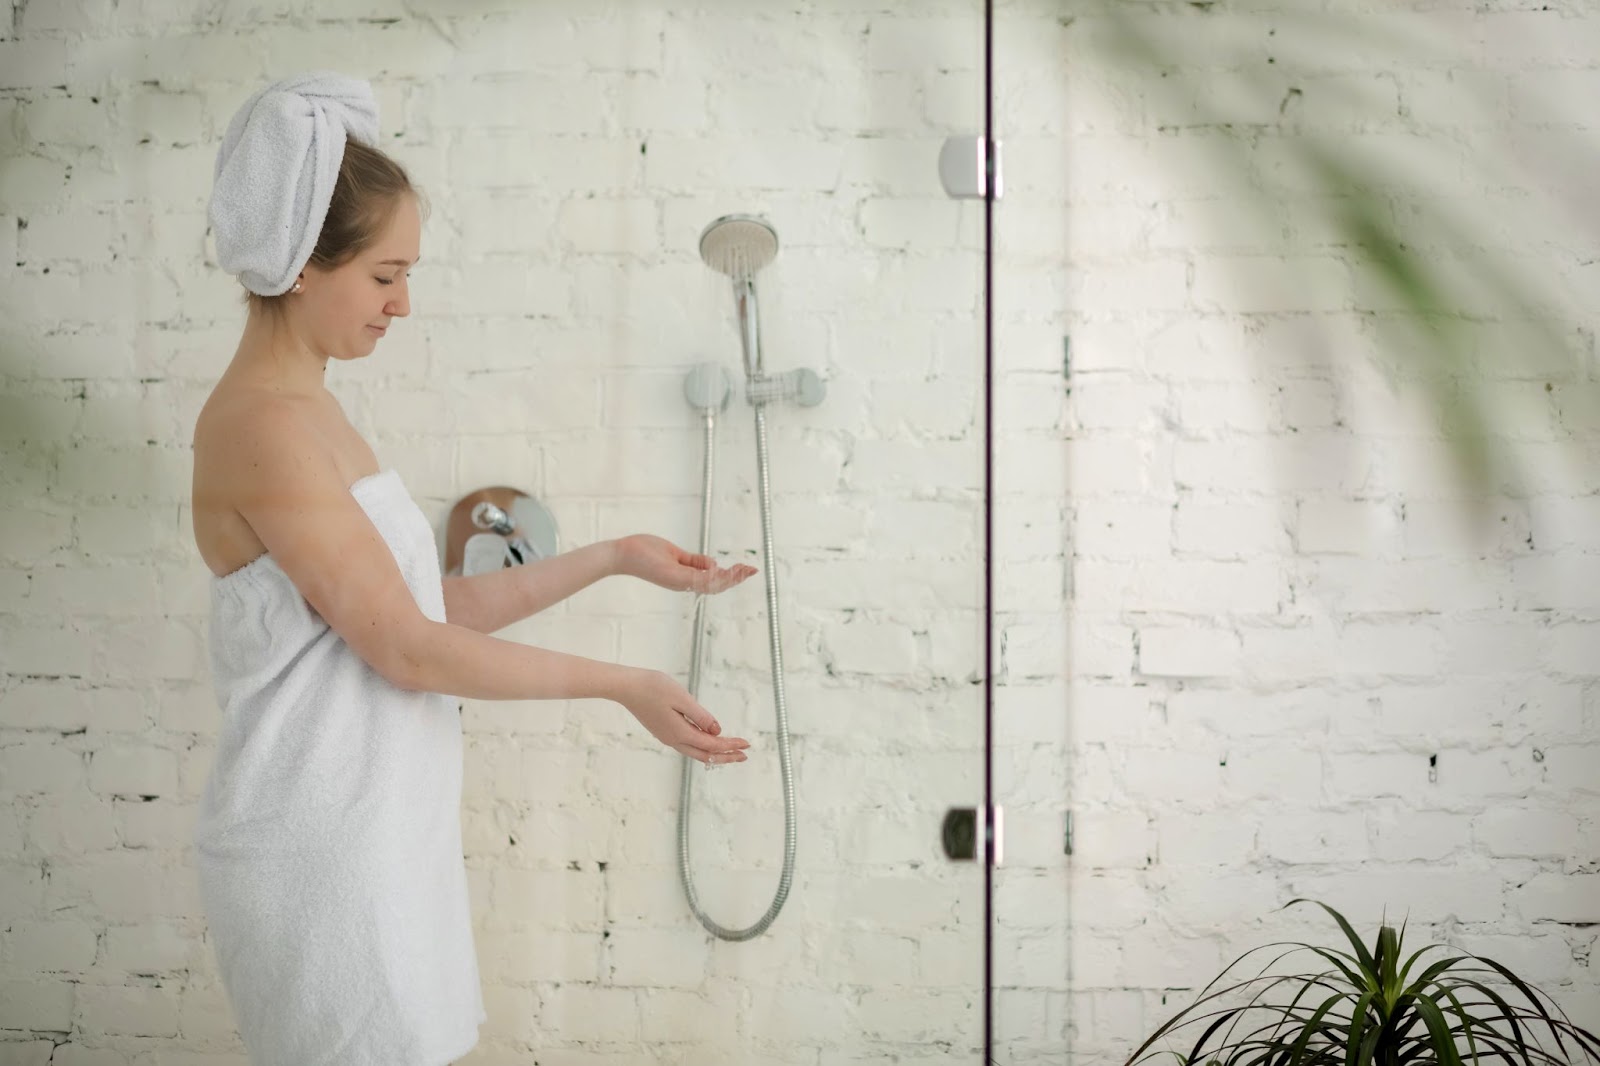 A young woman tests the water flow of a handheld shower set, highlighted against a crisp white background.